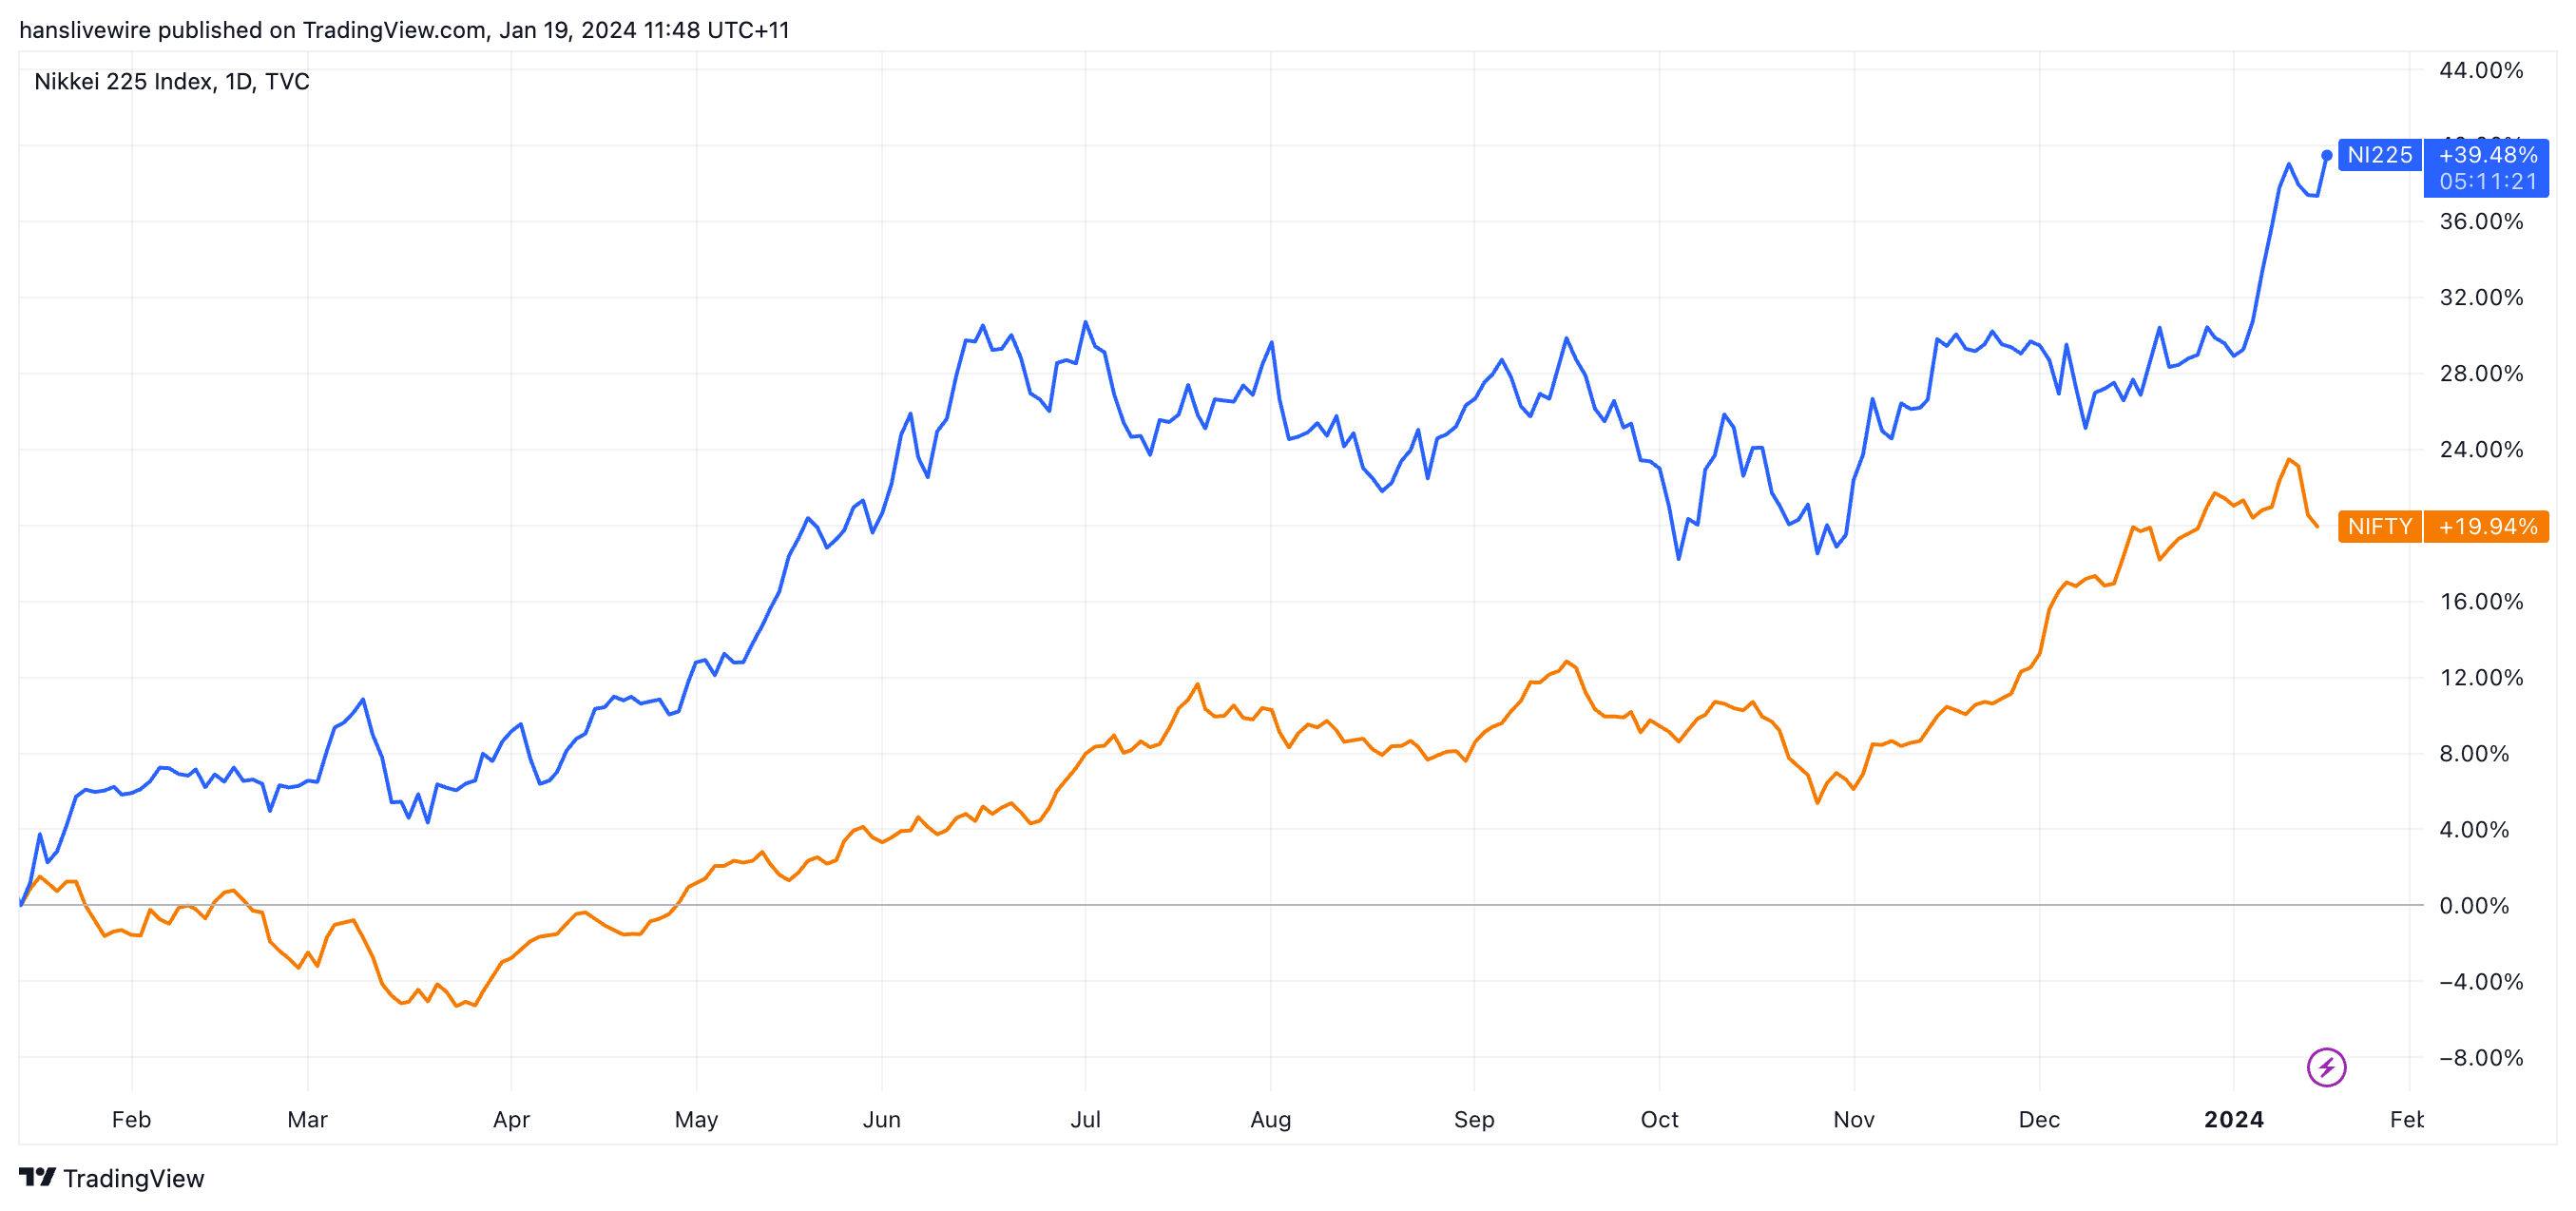 The Nikkei 225 (blue line) and the Nifty 50 (orange line)